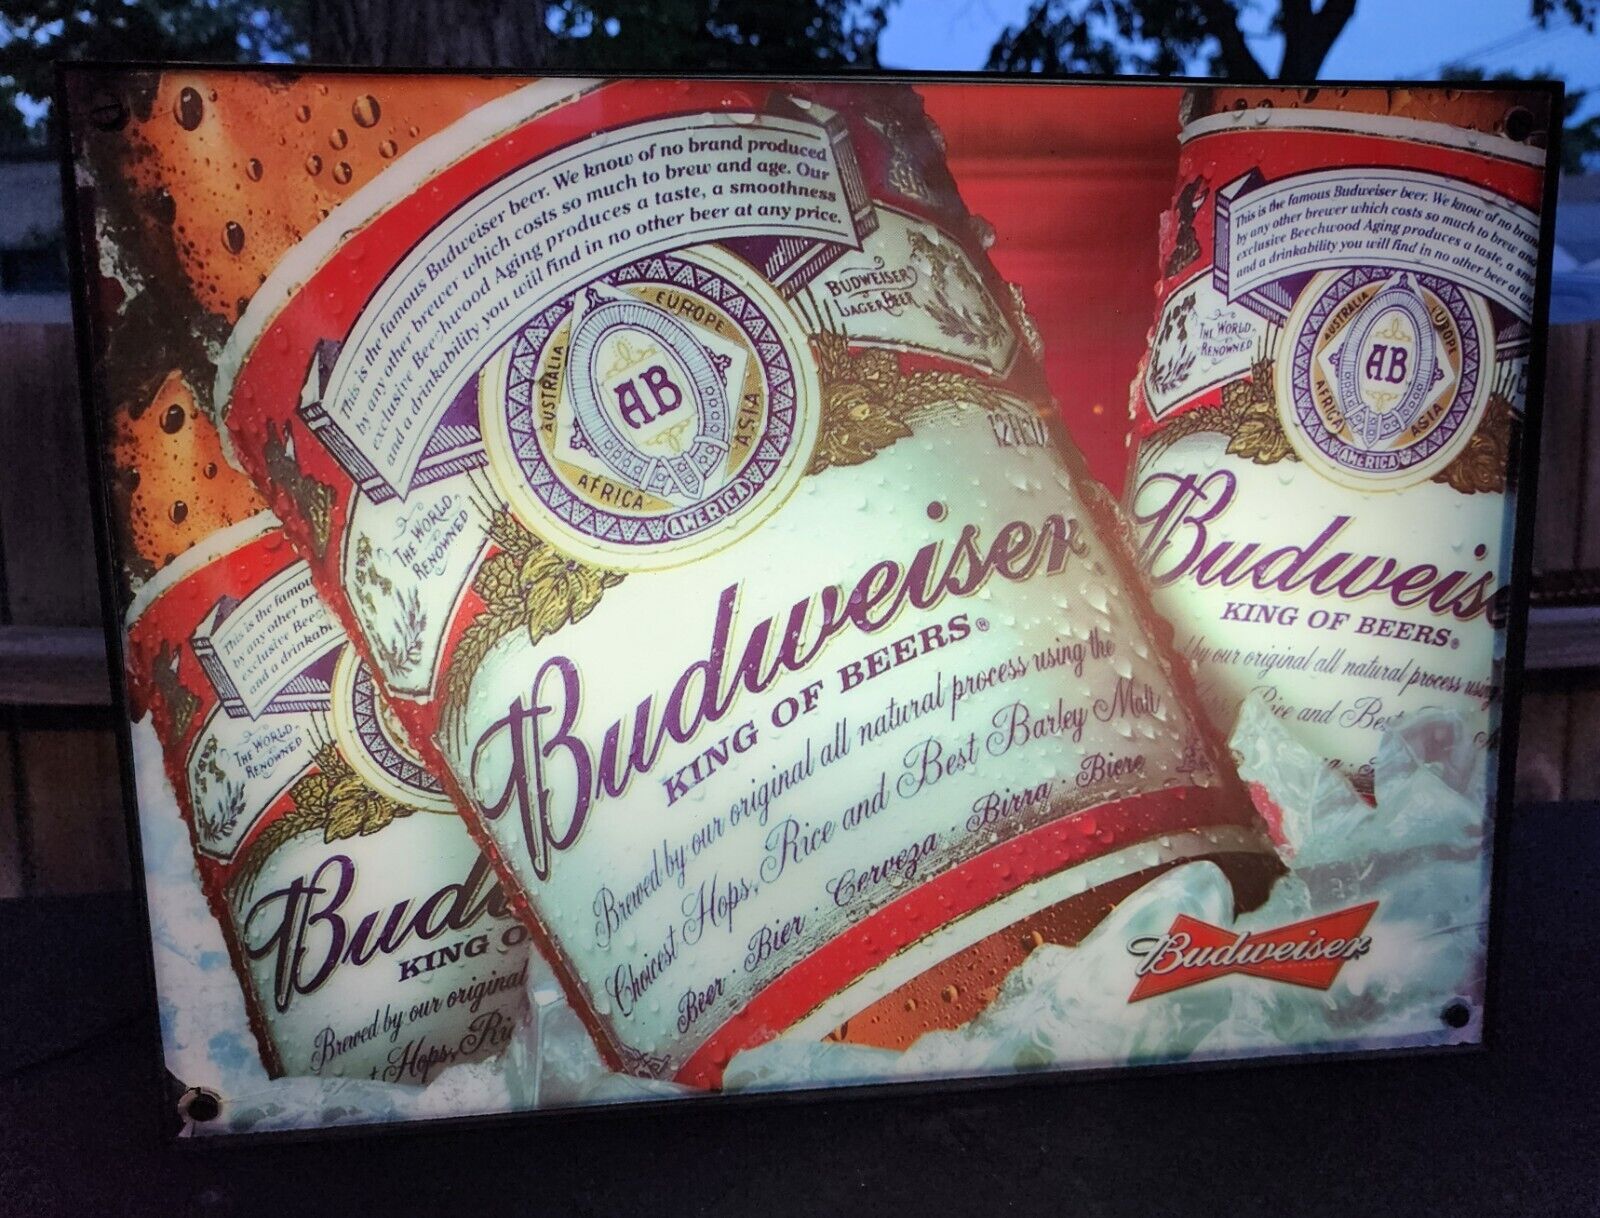 BUDWEISER ANHEUSER BUSCH LIGHTED BEER STORE ADVERTISING SIGN TESTED CLEAN WORKS